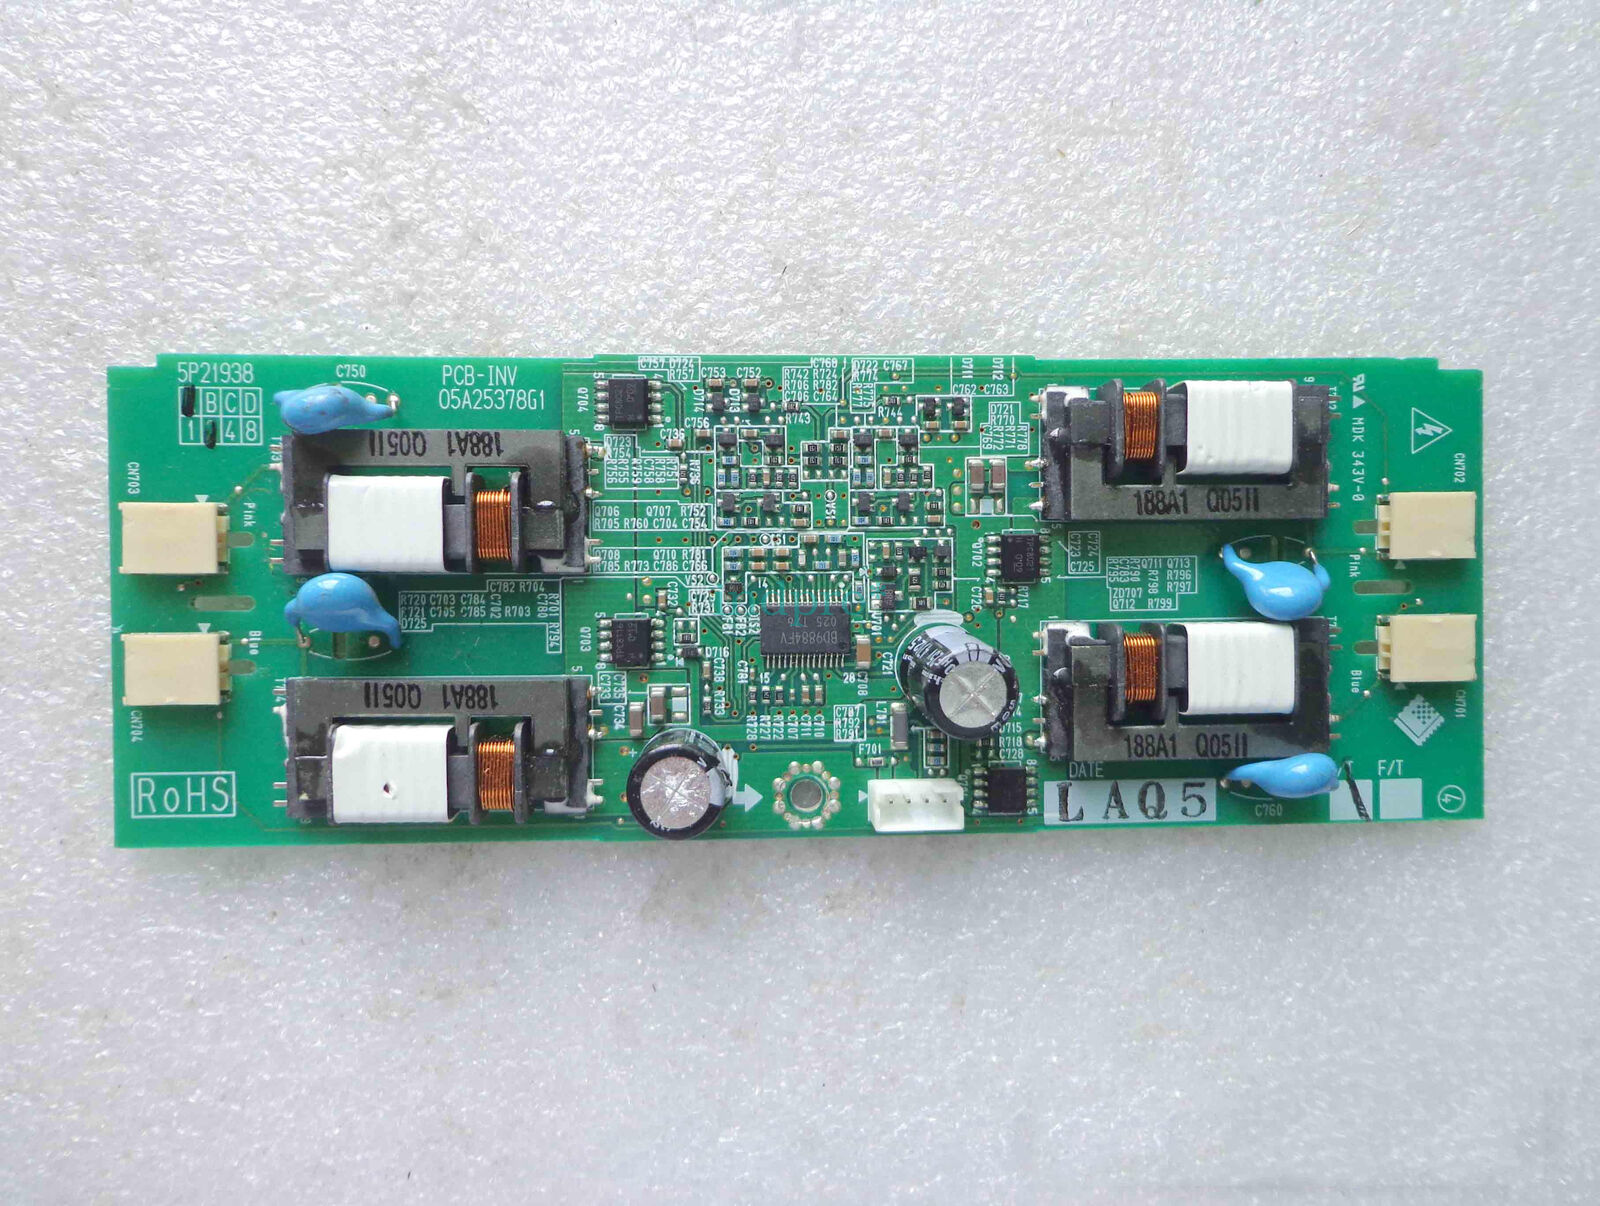 1Pcs For 05A25378G1 PCB-INV High pressure plate